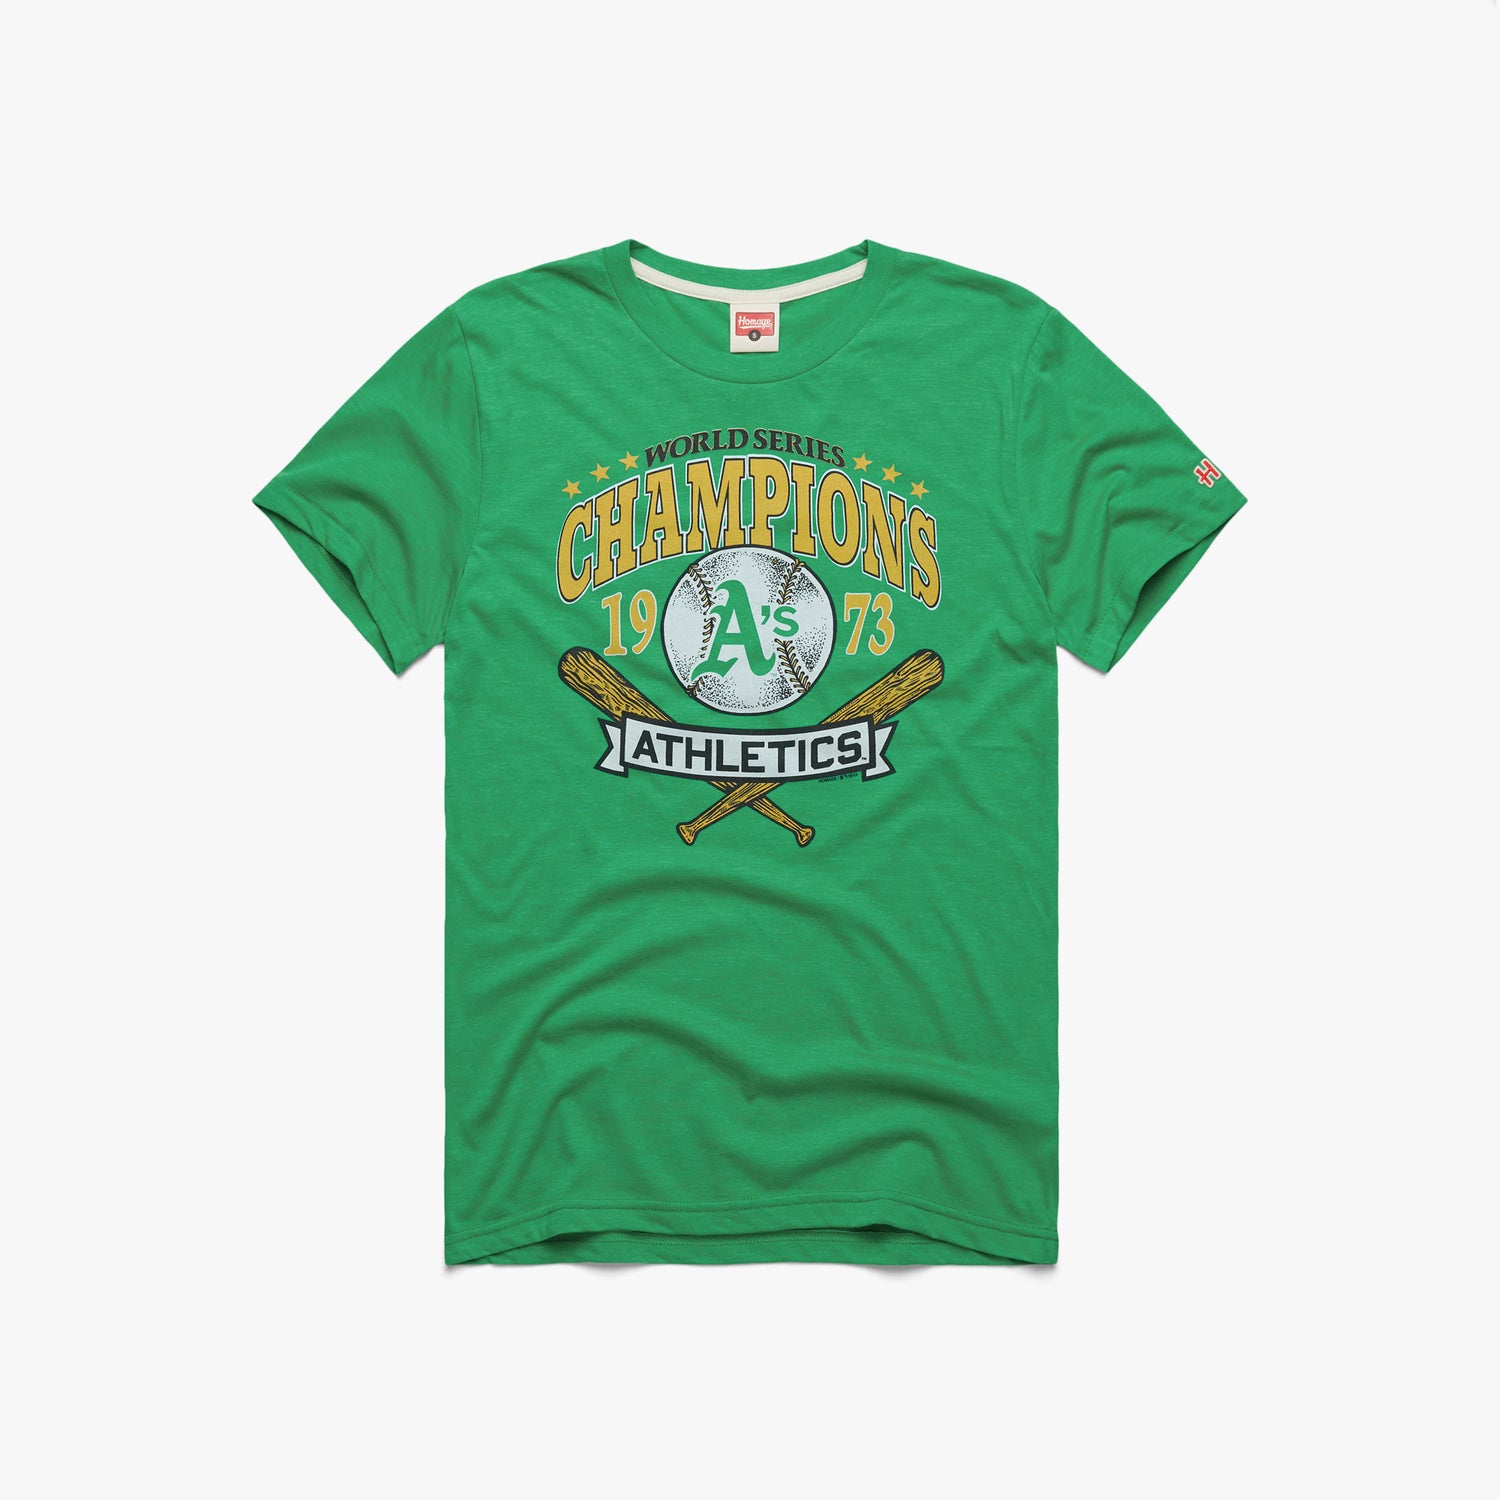 Vintage Champion Oakland A’s hoodie in green. From